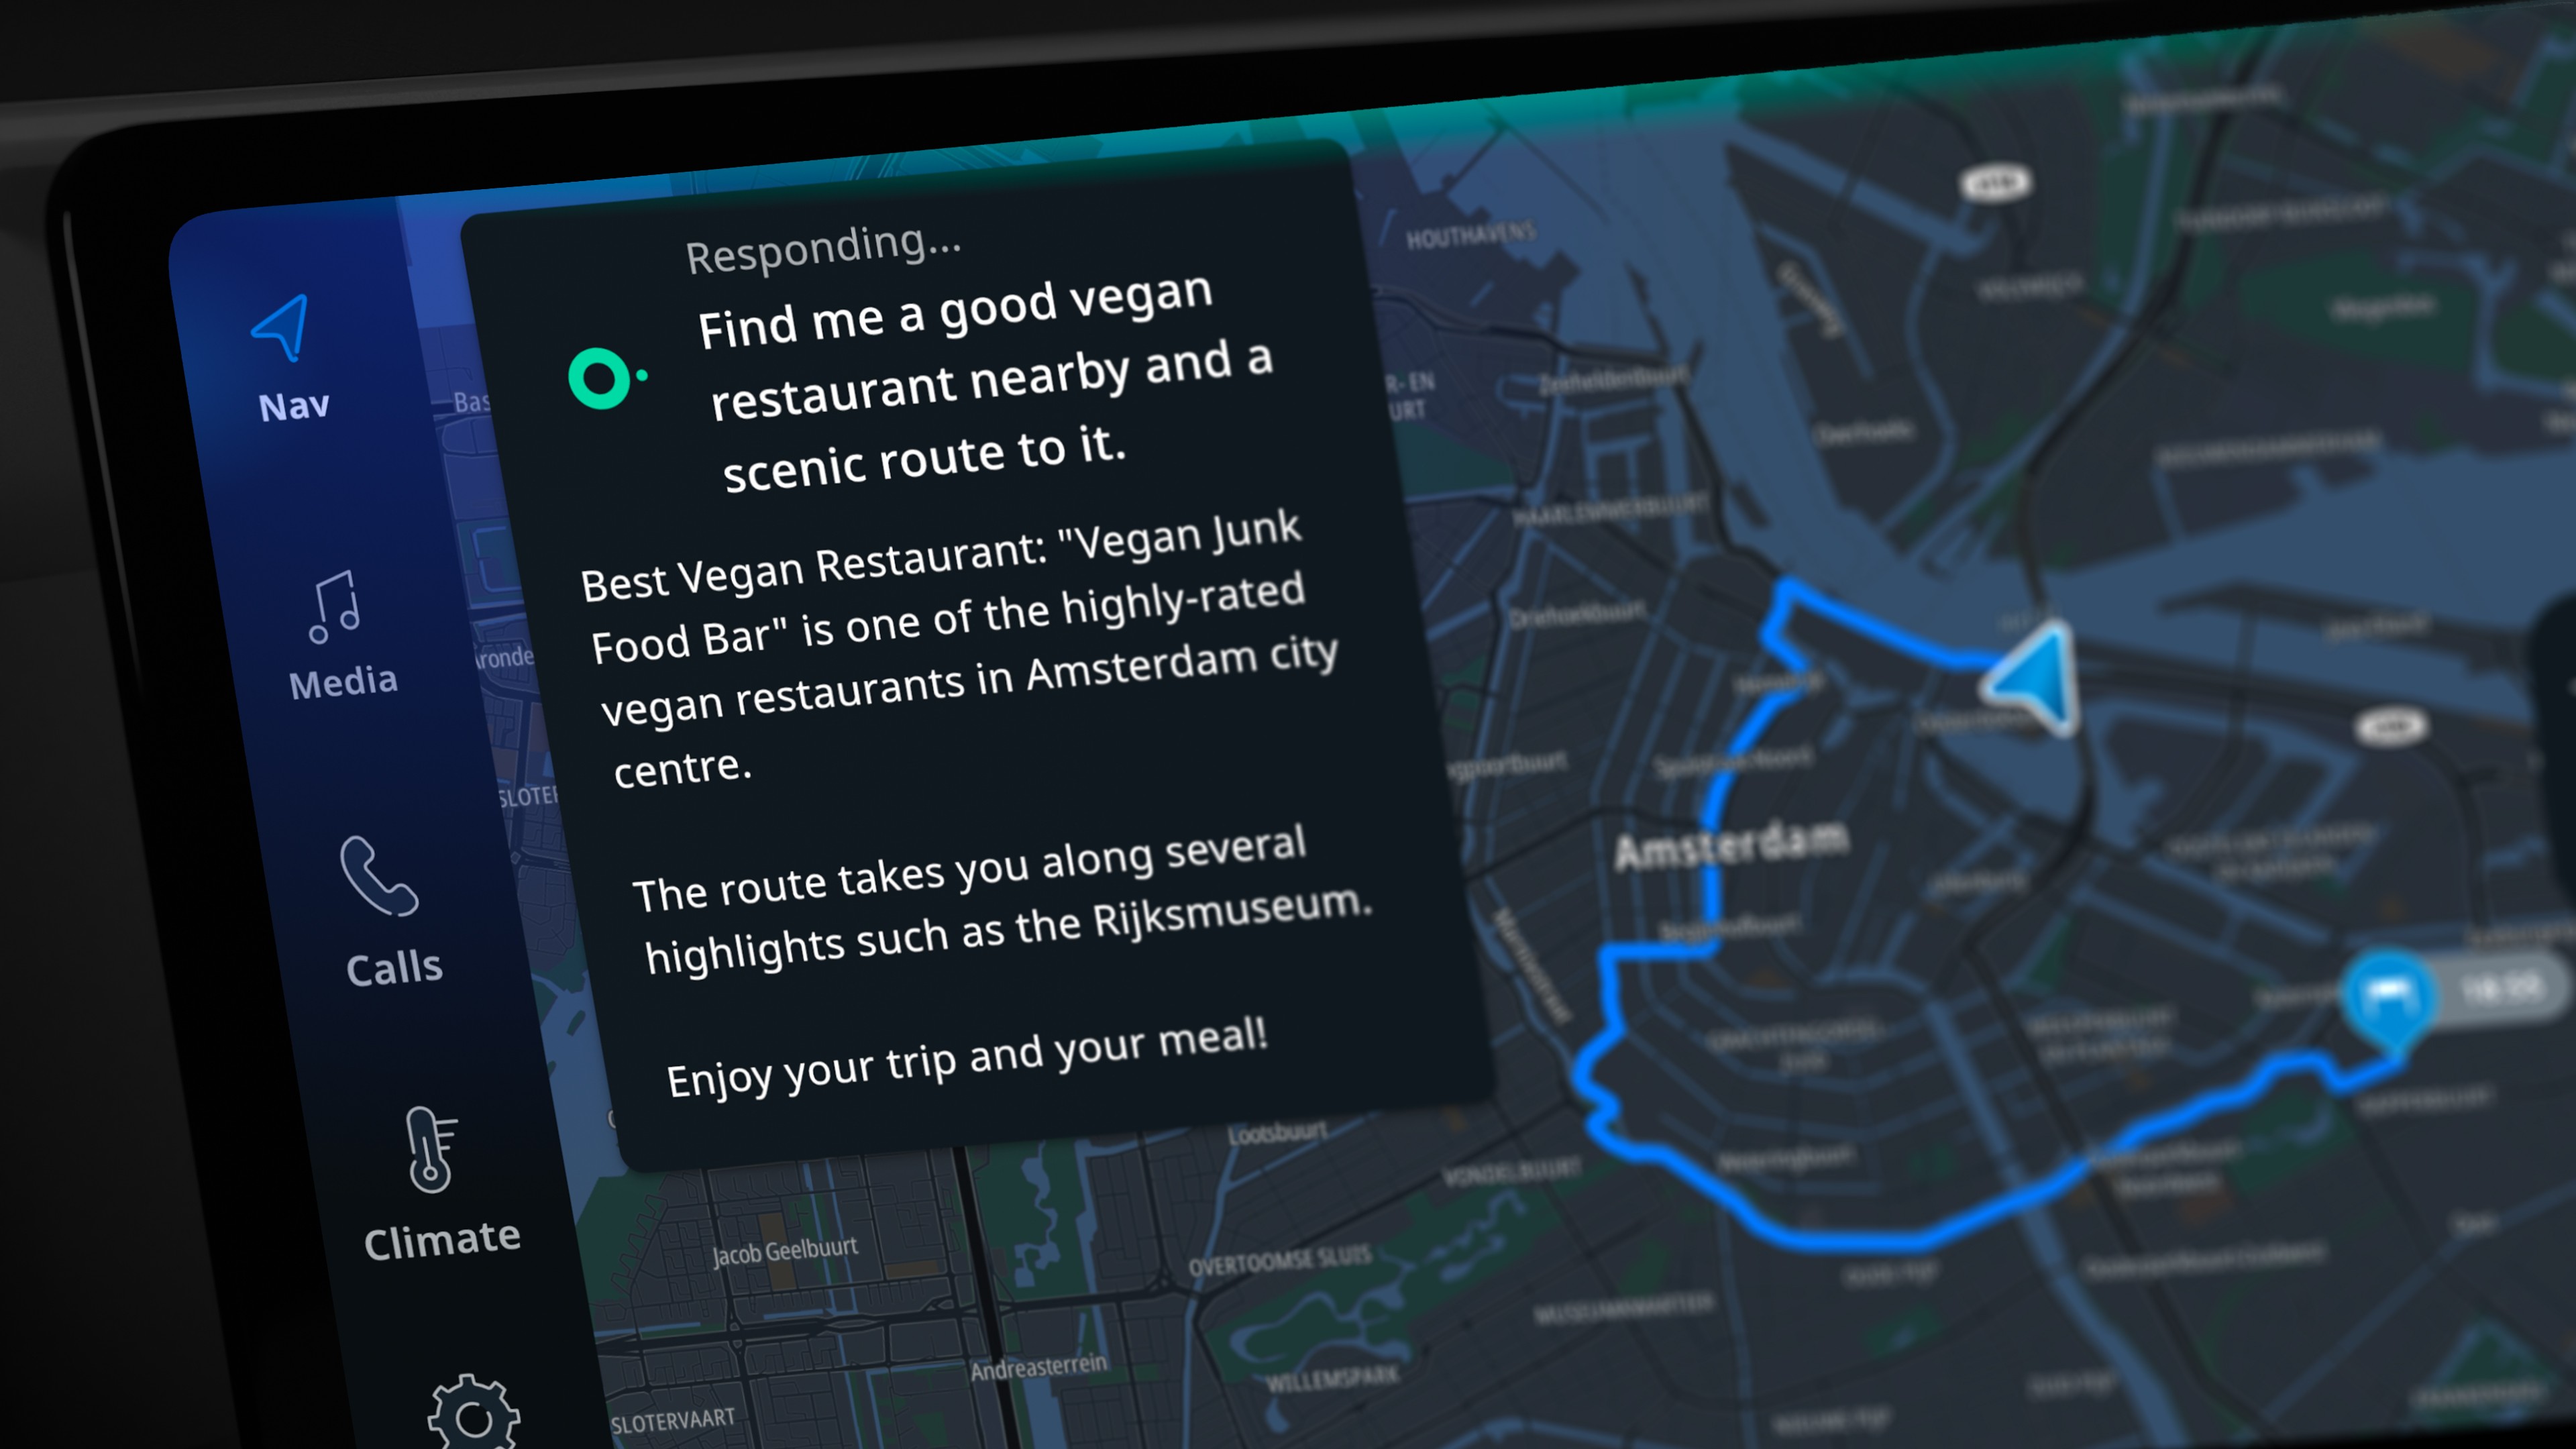 A picture of an in-vehicle screen with TomTom's AI assistant providing advice and directions to a vegan restaurant.